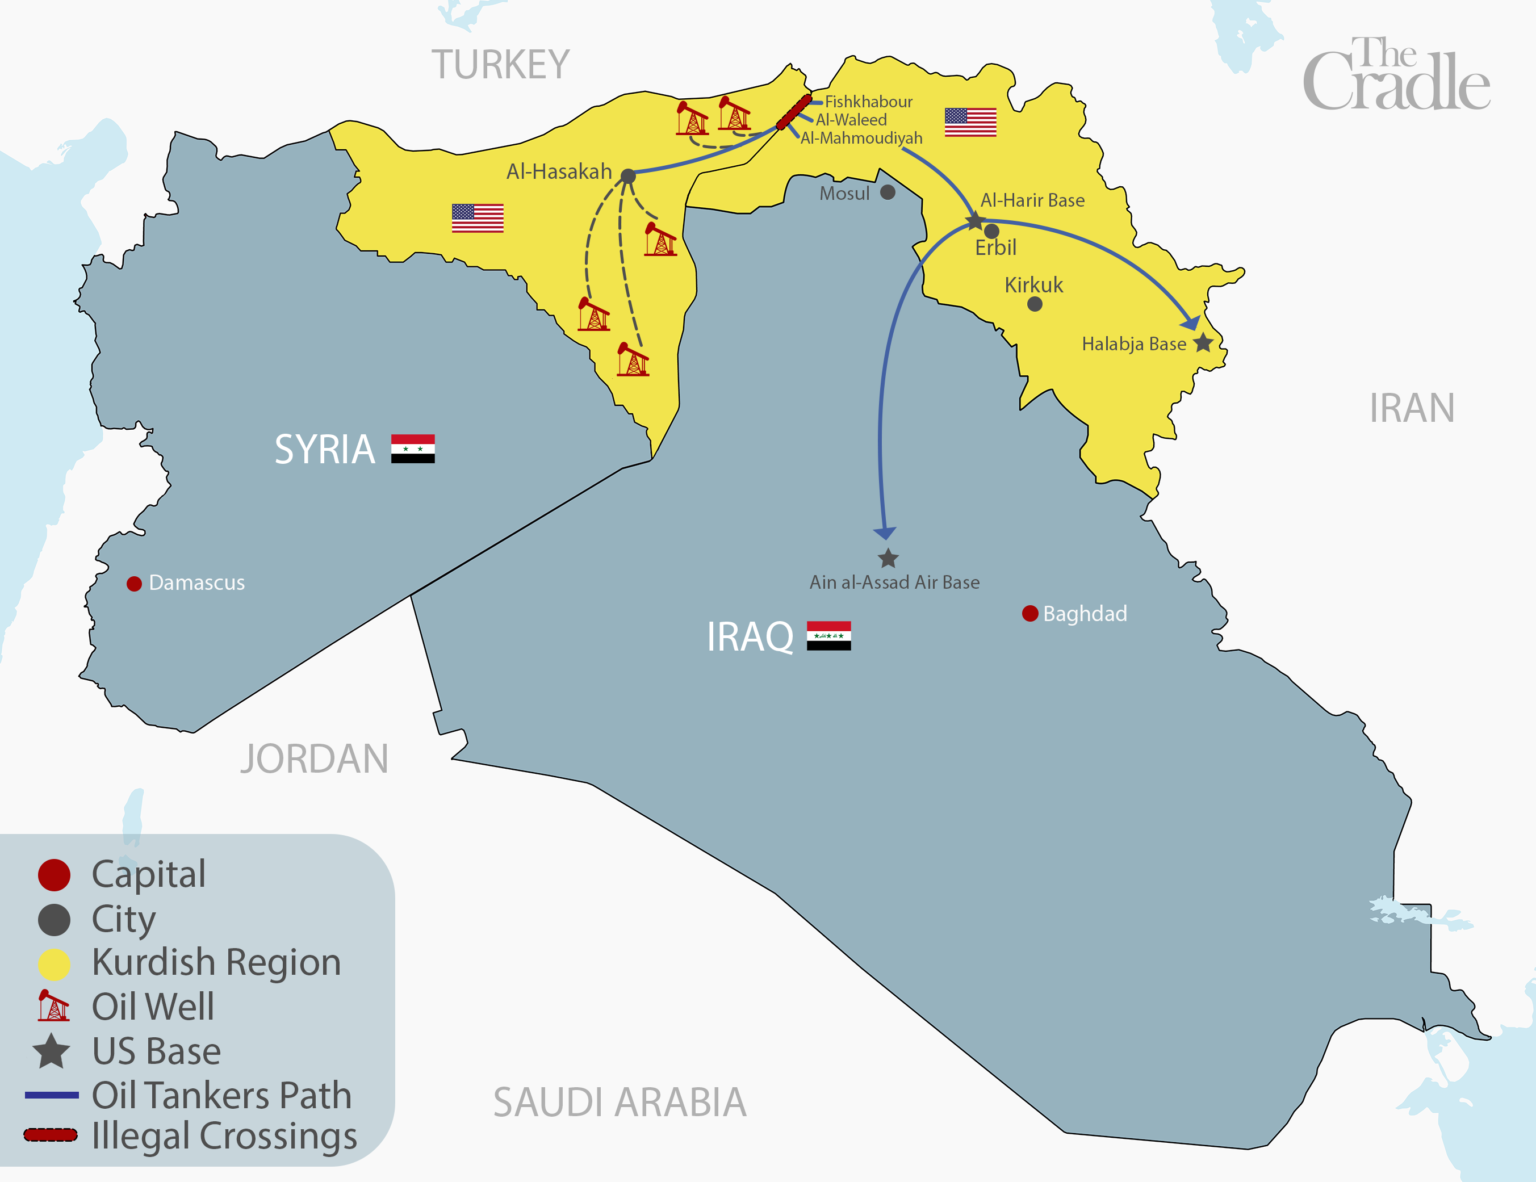 How-the-US-loot-oil-from-Syria-and-smuggle-it-to-Iraq-1536x1182.png